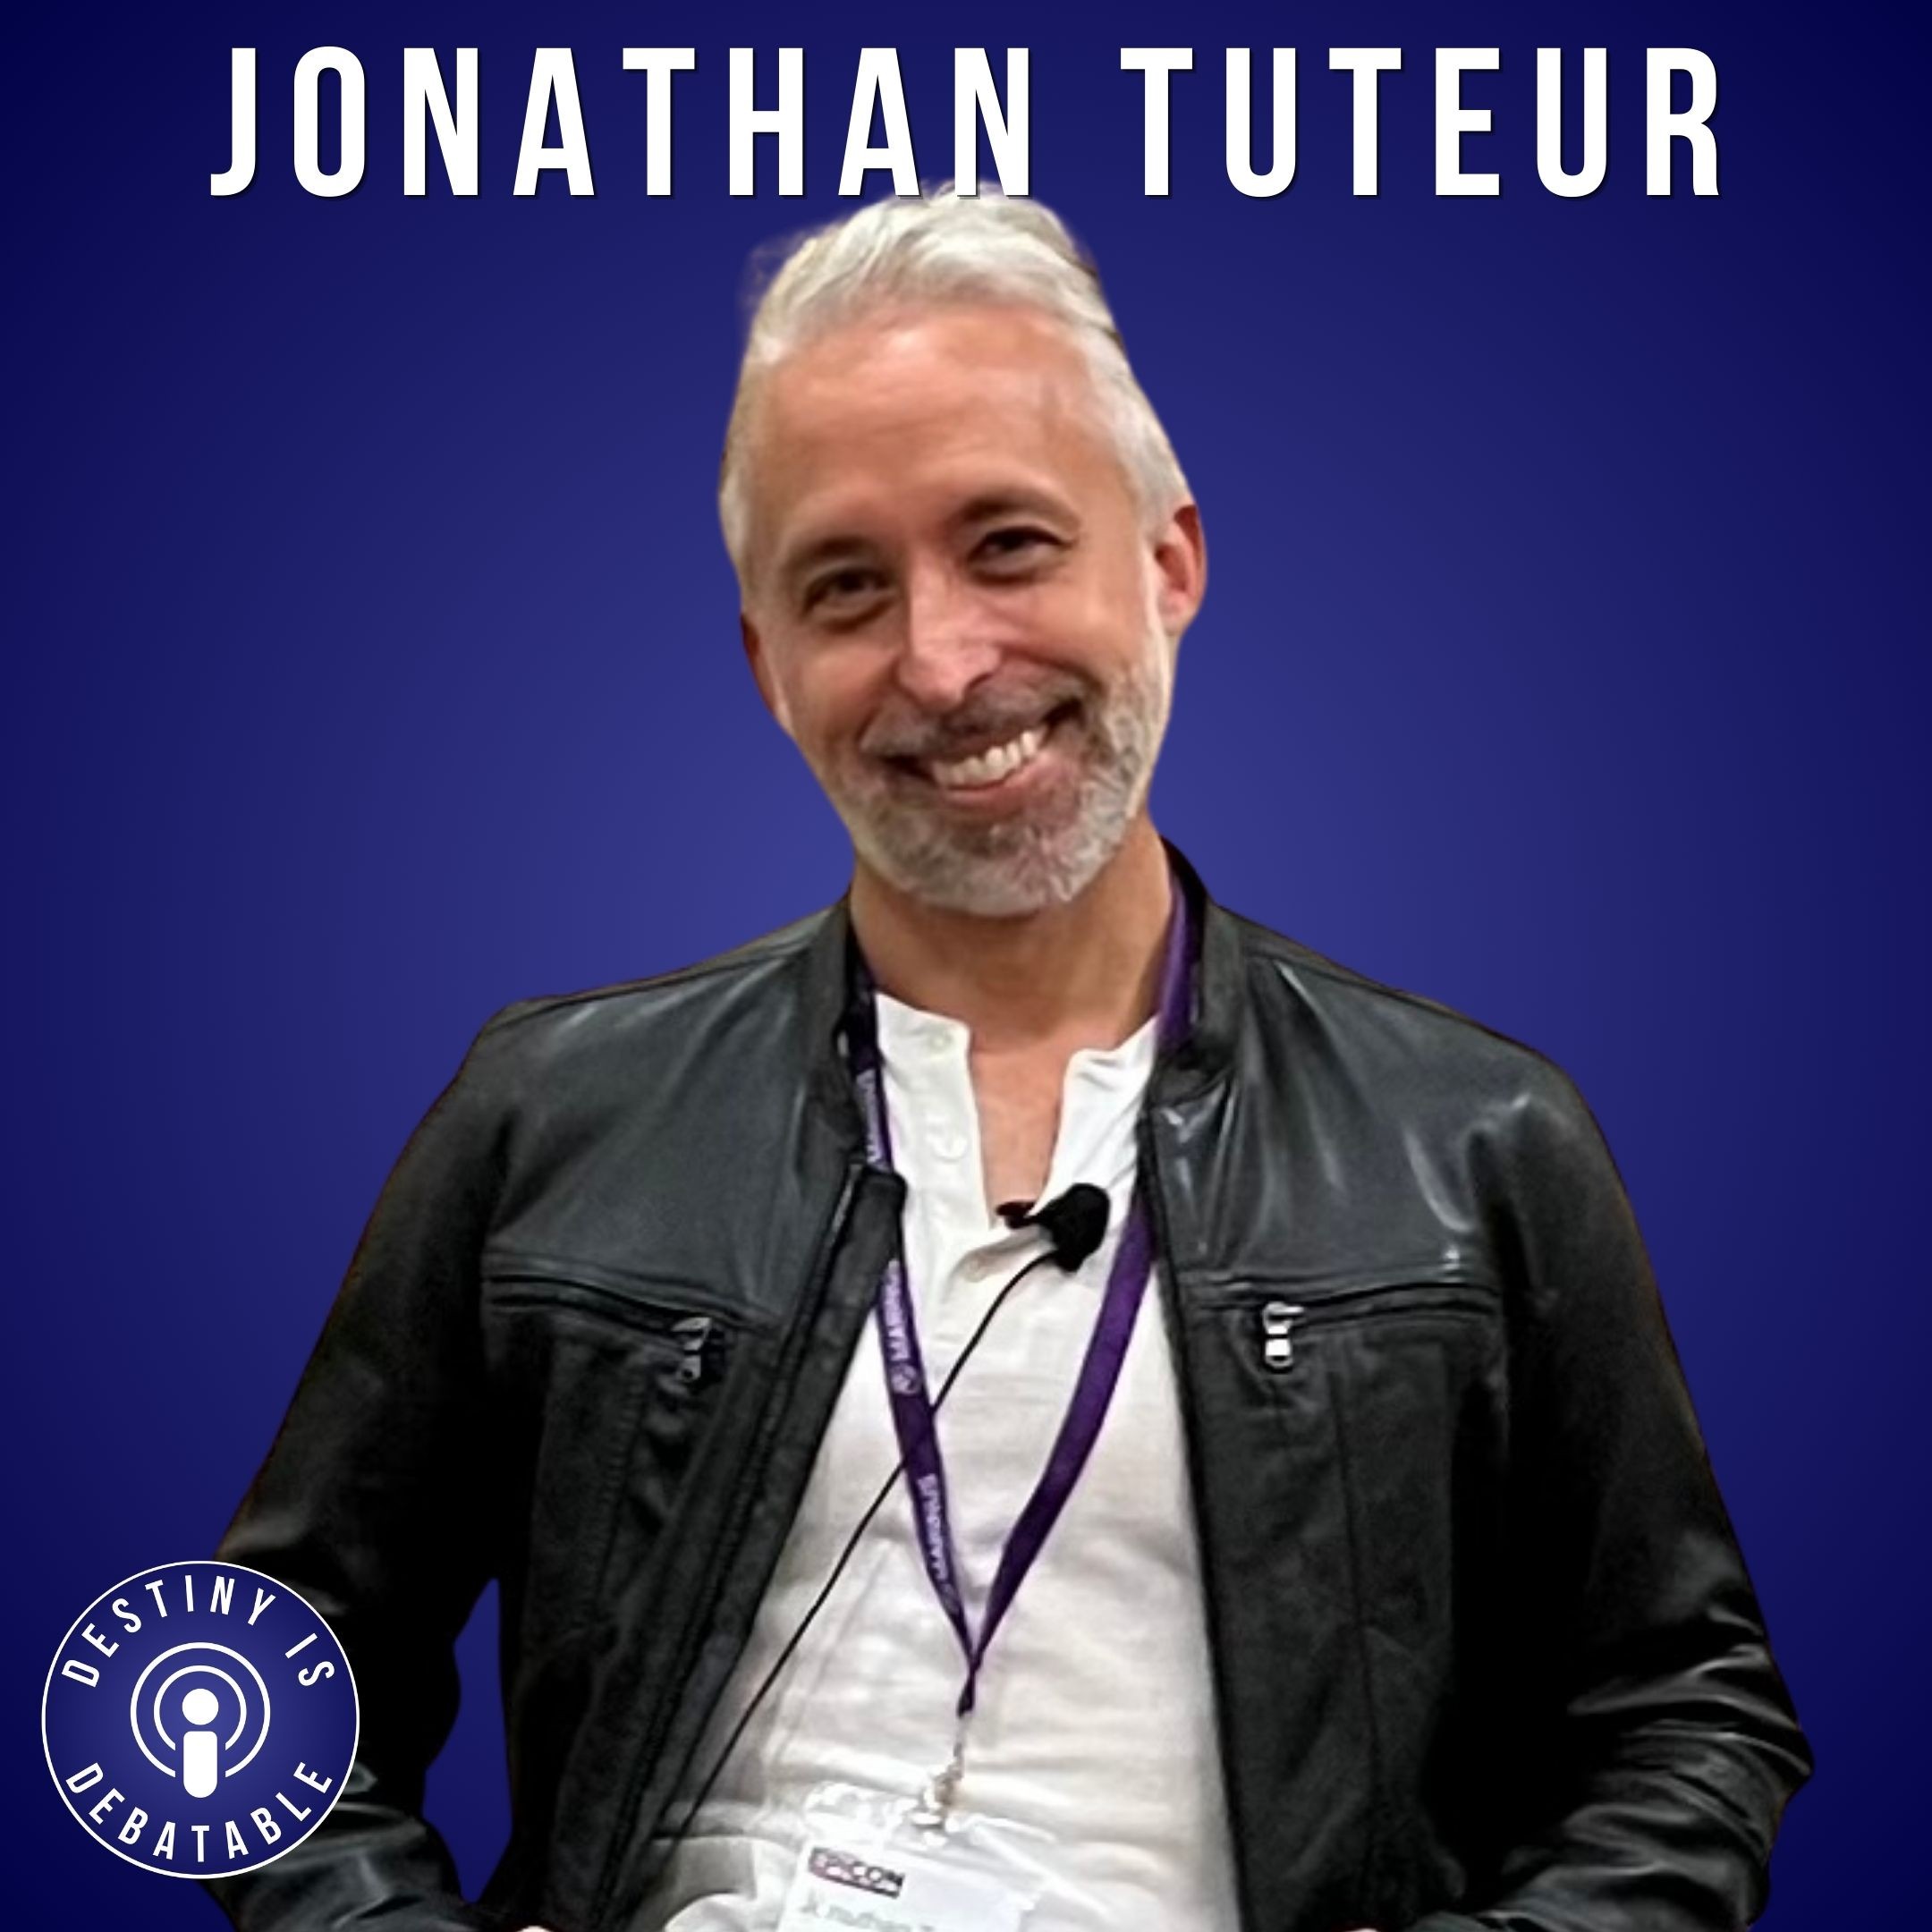 Seizing Today: Jonathan Tuteur’s Journey with Epilepsy and Finding Purpose